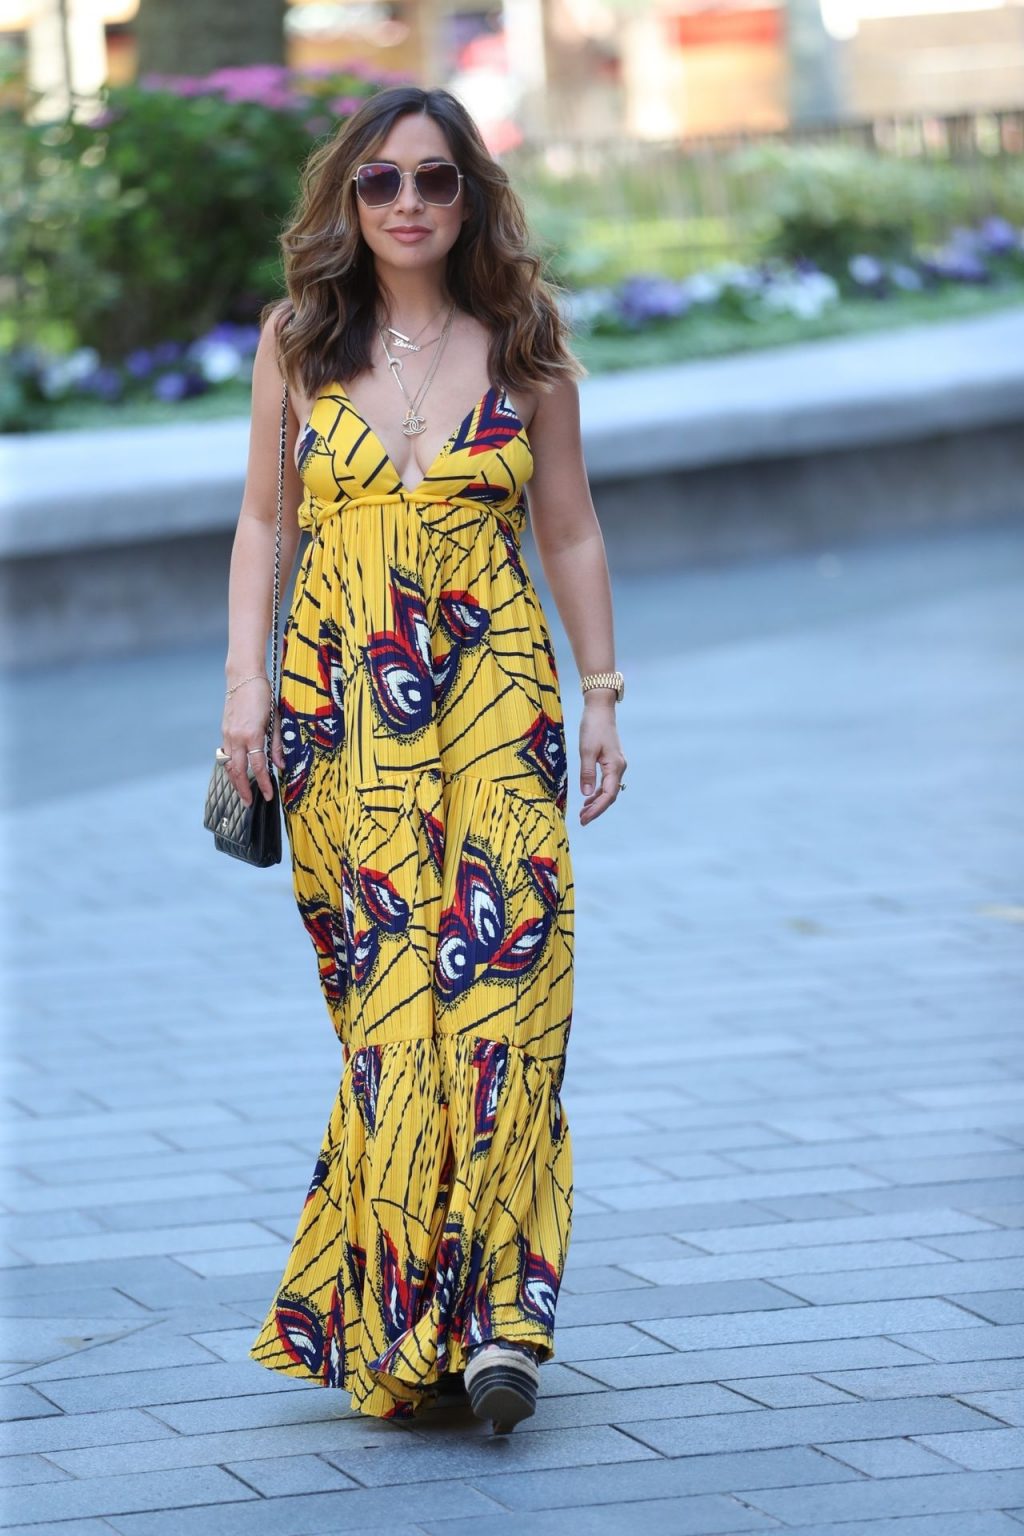 Myleene Klass Shows Off Her Cleavage in a Maxi Dress in London (15 Photos)